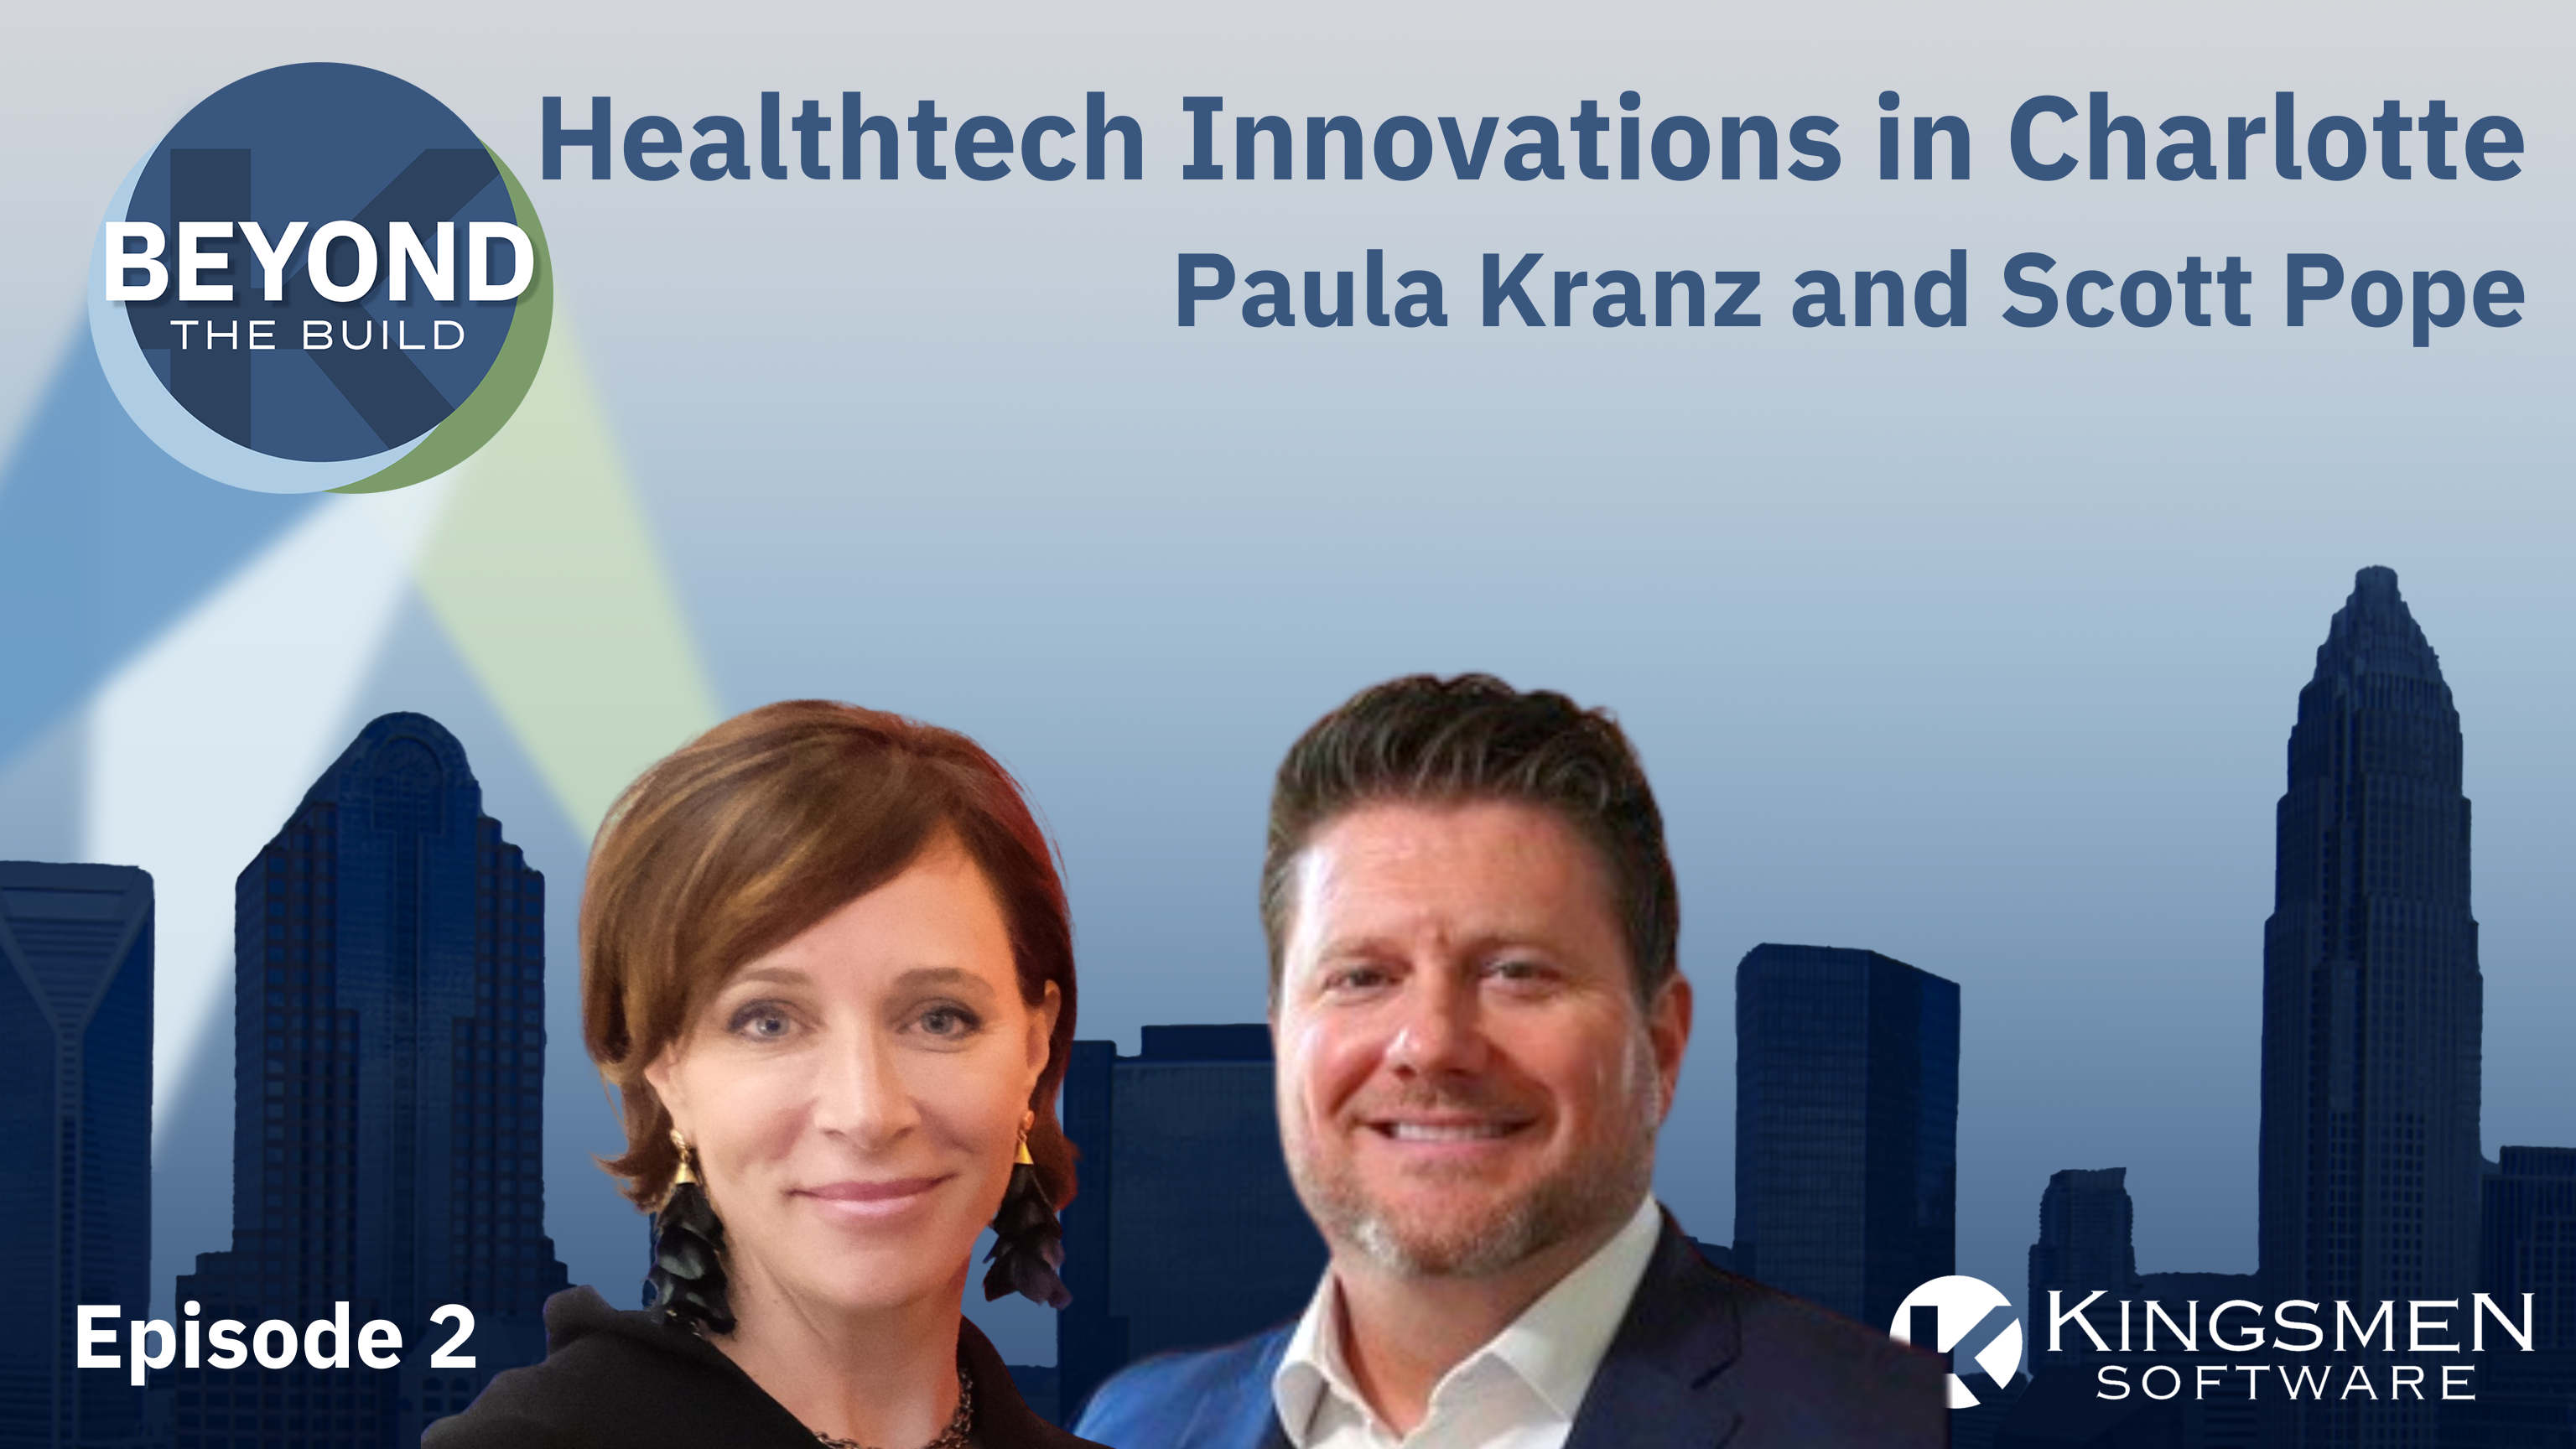 Episode 2: Healthtech Innovations in Charlotte with Paula Kranz & Dr. Scott Pope